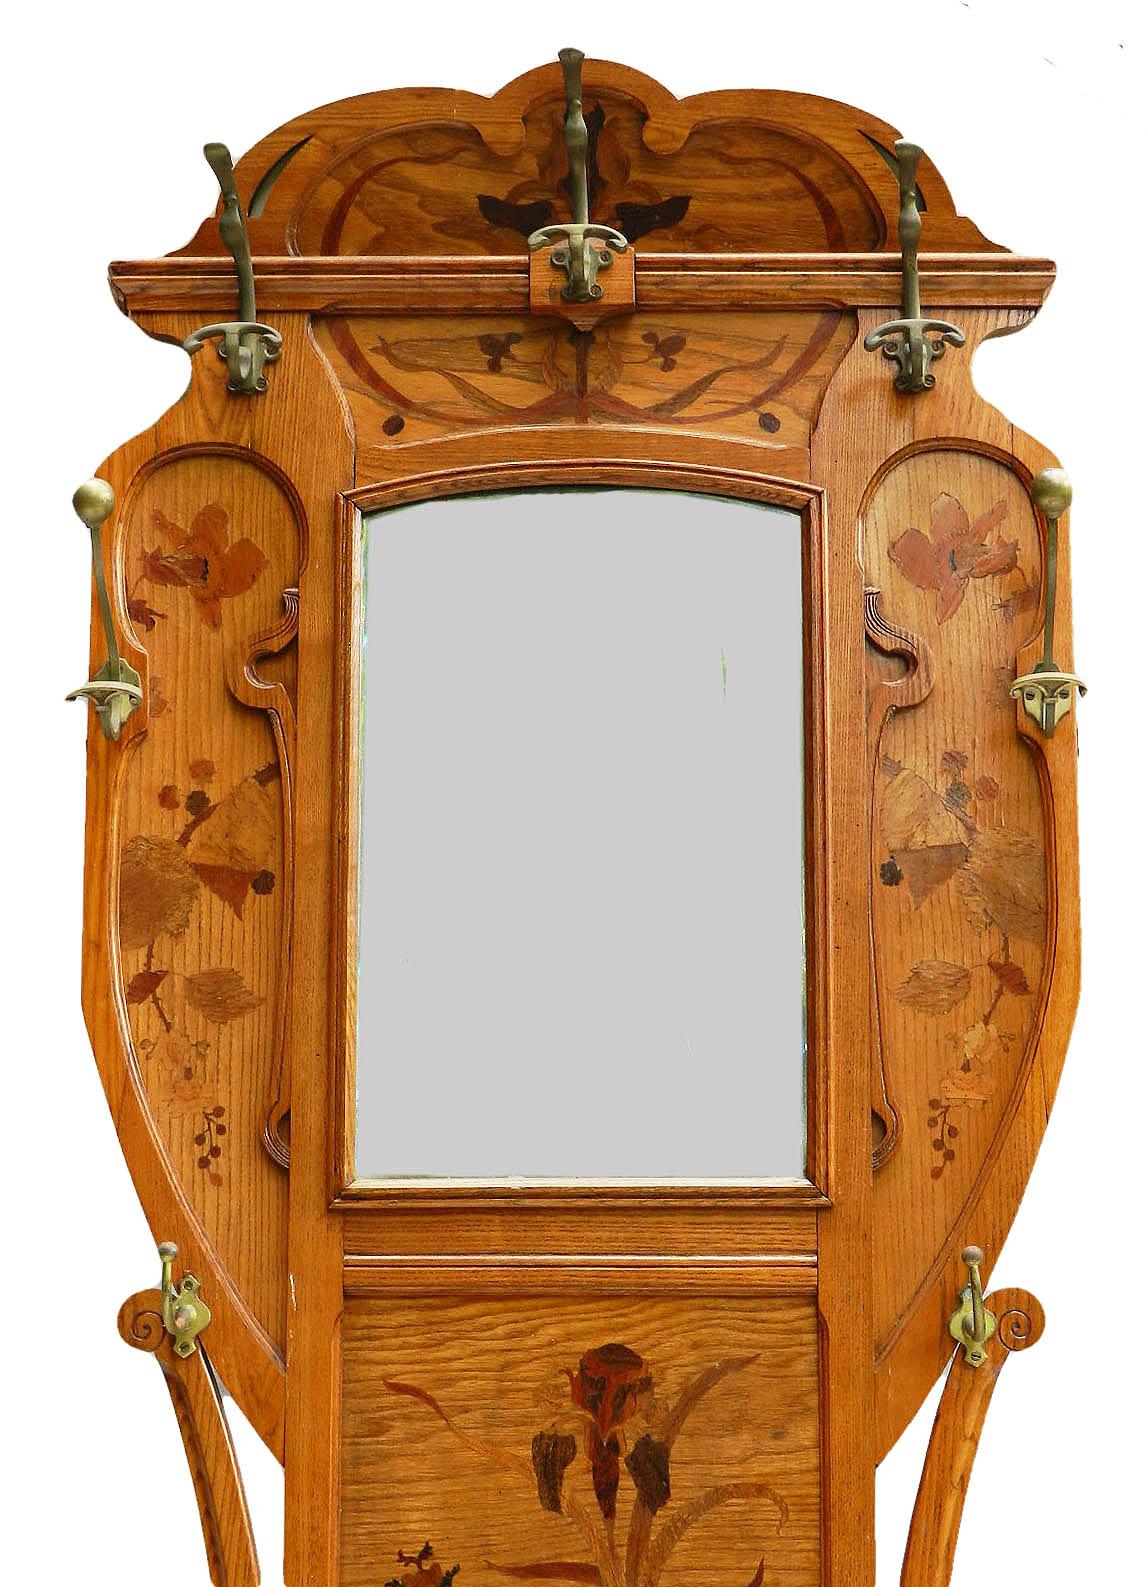 Coat rack hall stand Ecole de Nancy manner of Majorelle
Pitch pine
Inlaid Marquetry with Irises and foliage of various different woods
Original beveled mirror in good condition
Good antique condition with some old restorations and 2 replacement coat